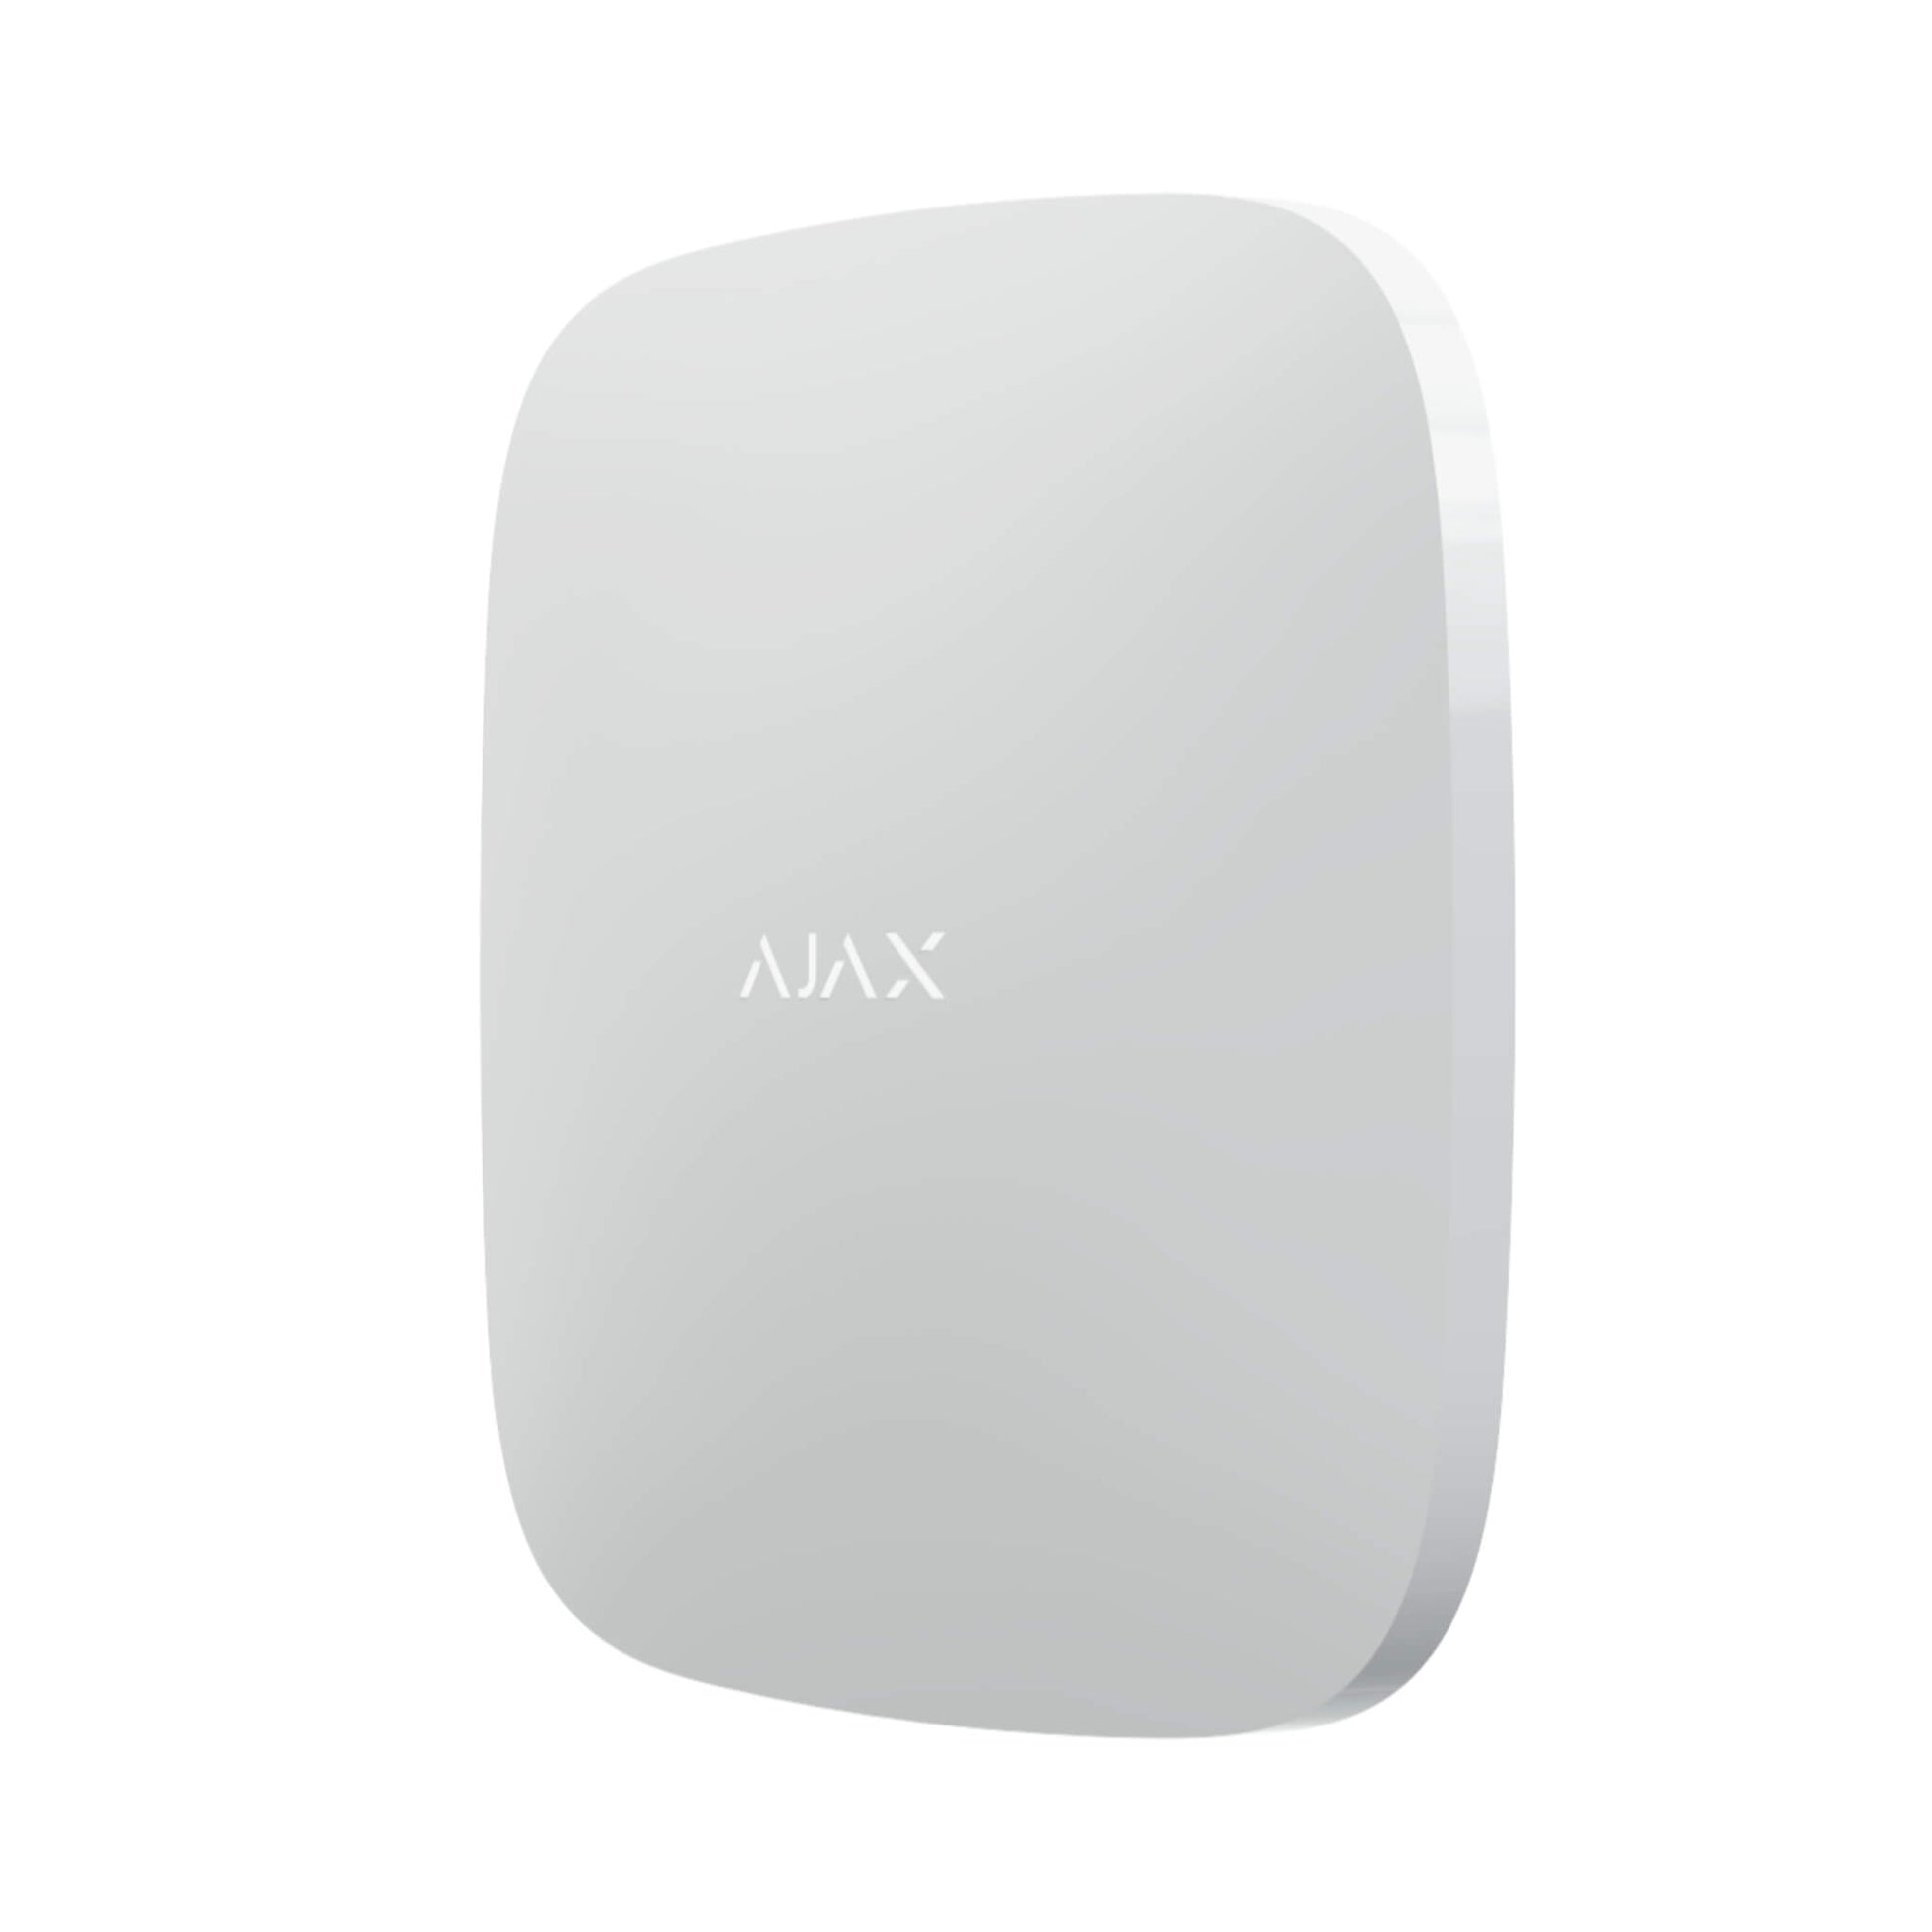 White Ajax Hub 2 (4G) alarm control panel for Ajax Security Systems with Ethernet and 4G LTE backup, 163 × 163 × 36 mm in size, 361grams in weight, lithium battery backup inside device turned right view of device